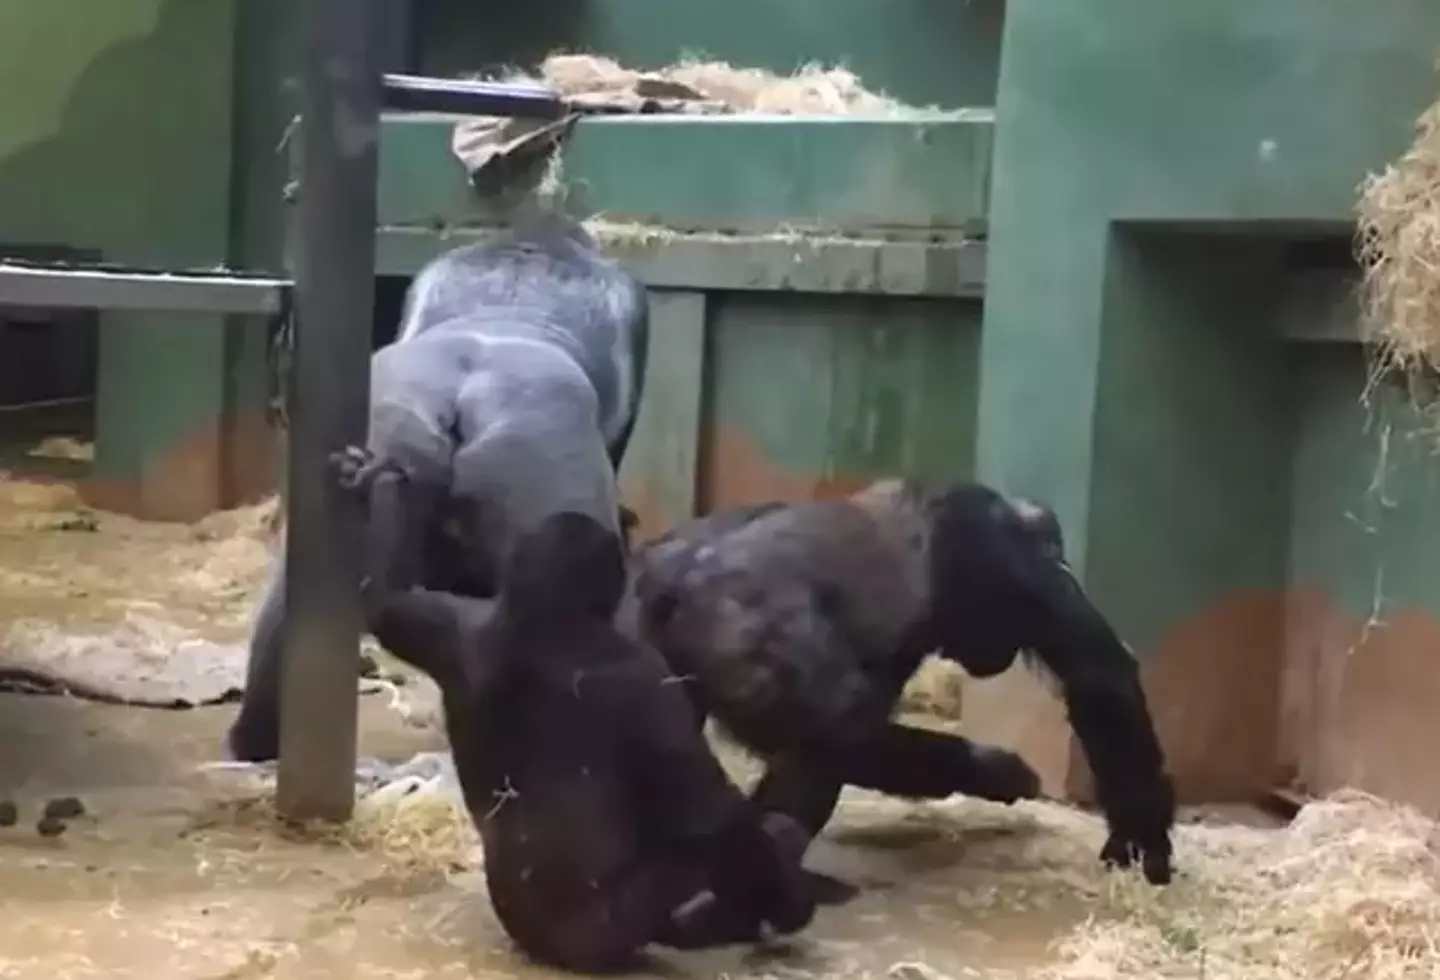 Once the sex was over, the gorillas swiftly went their separate ways.